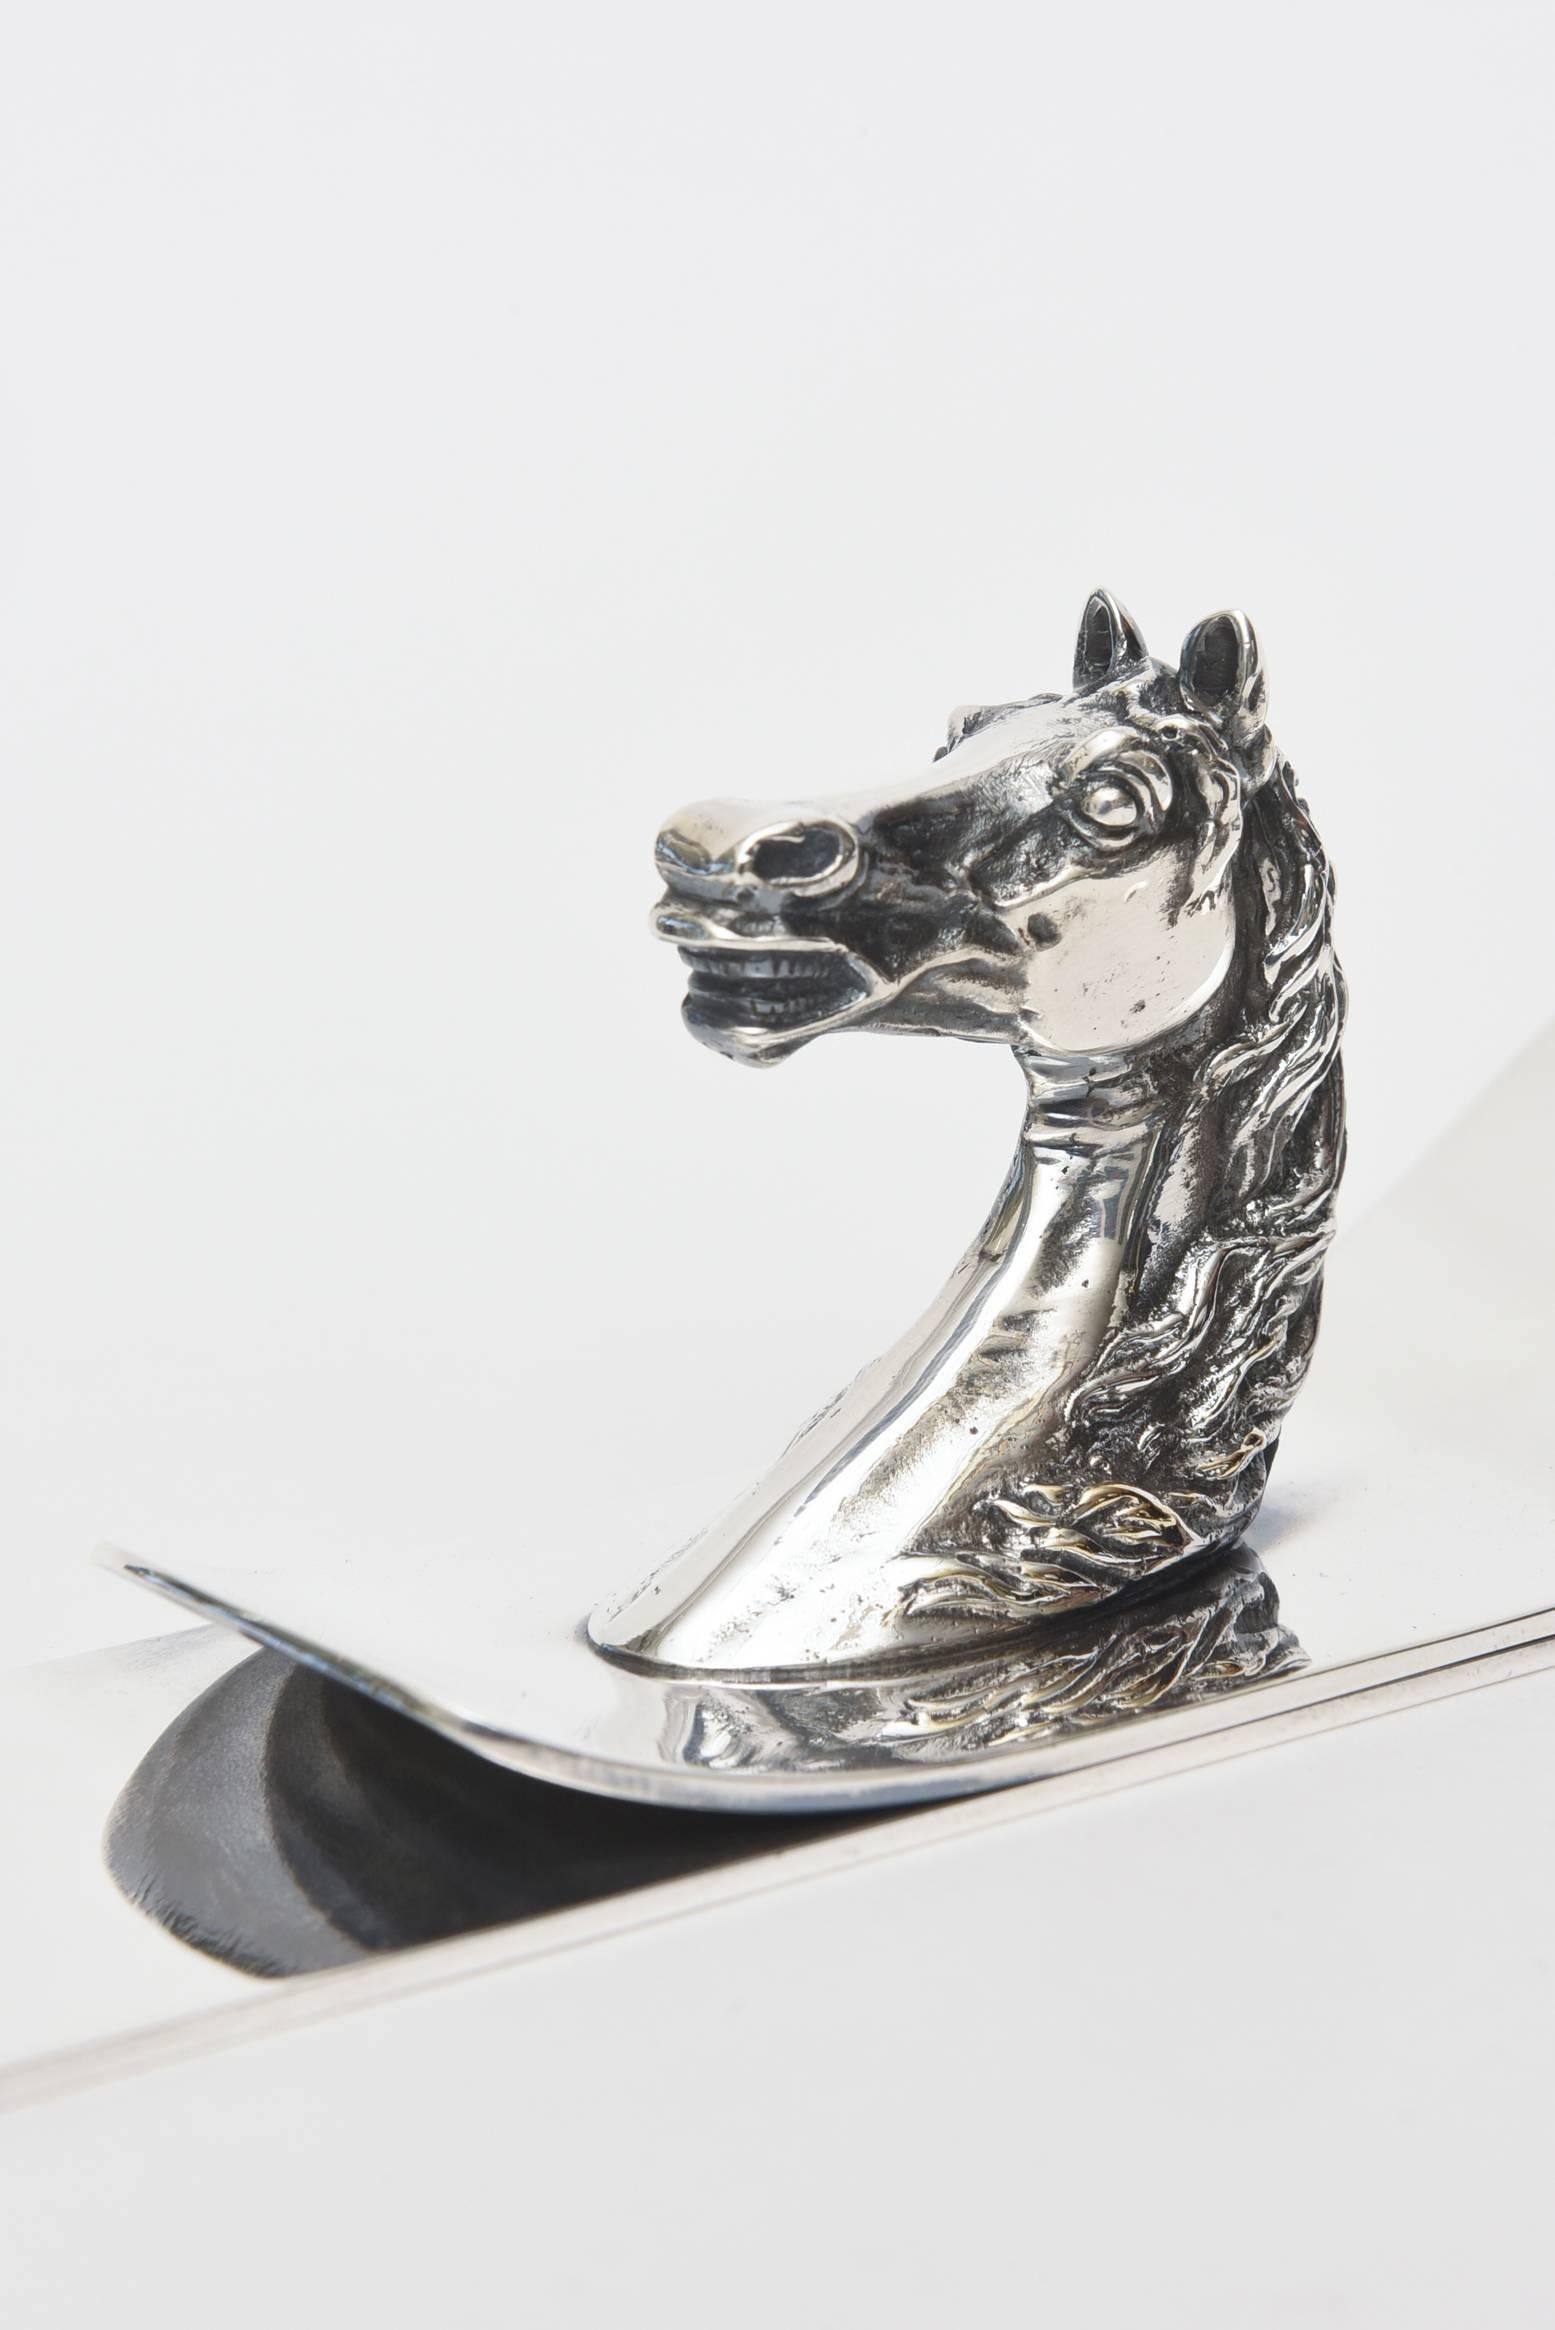 This wonderful vintage Hermès paper holder or letter clip is on the rare side. It is signed Hermès Paris and is polished silver plate. It was designed by Ravinet Denfort for Hermes. The elegant horse or equestrian bust that sits atop is stately.